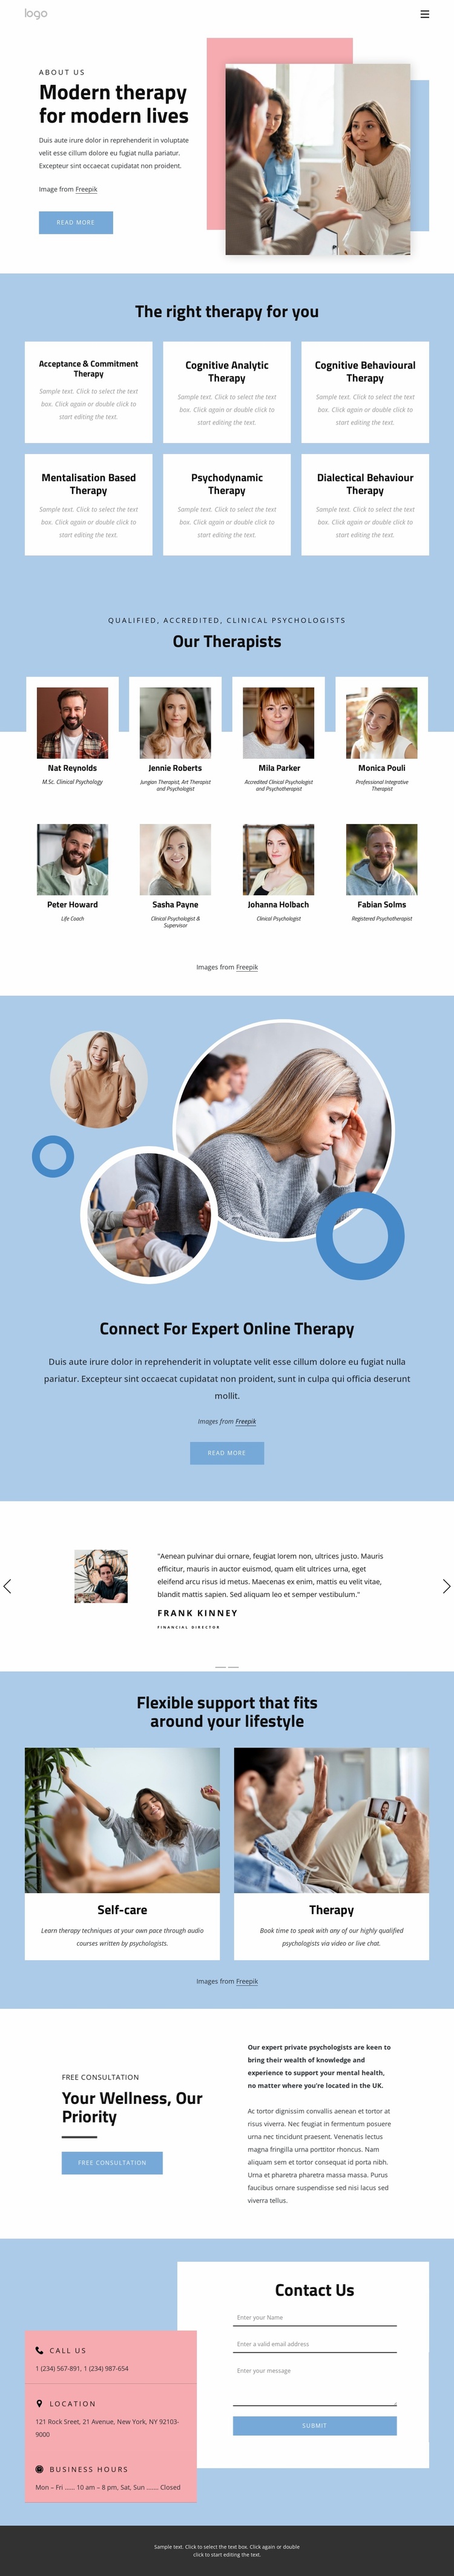 Modern therapy Ecommerce Website Design